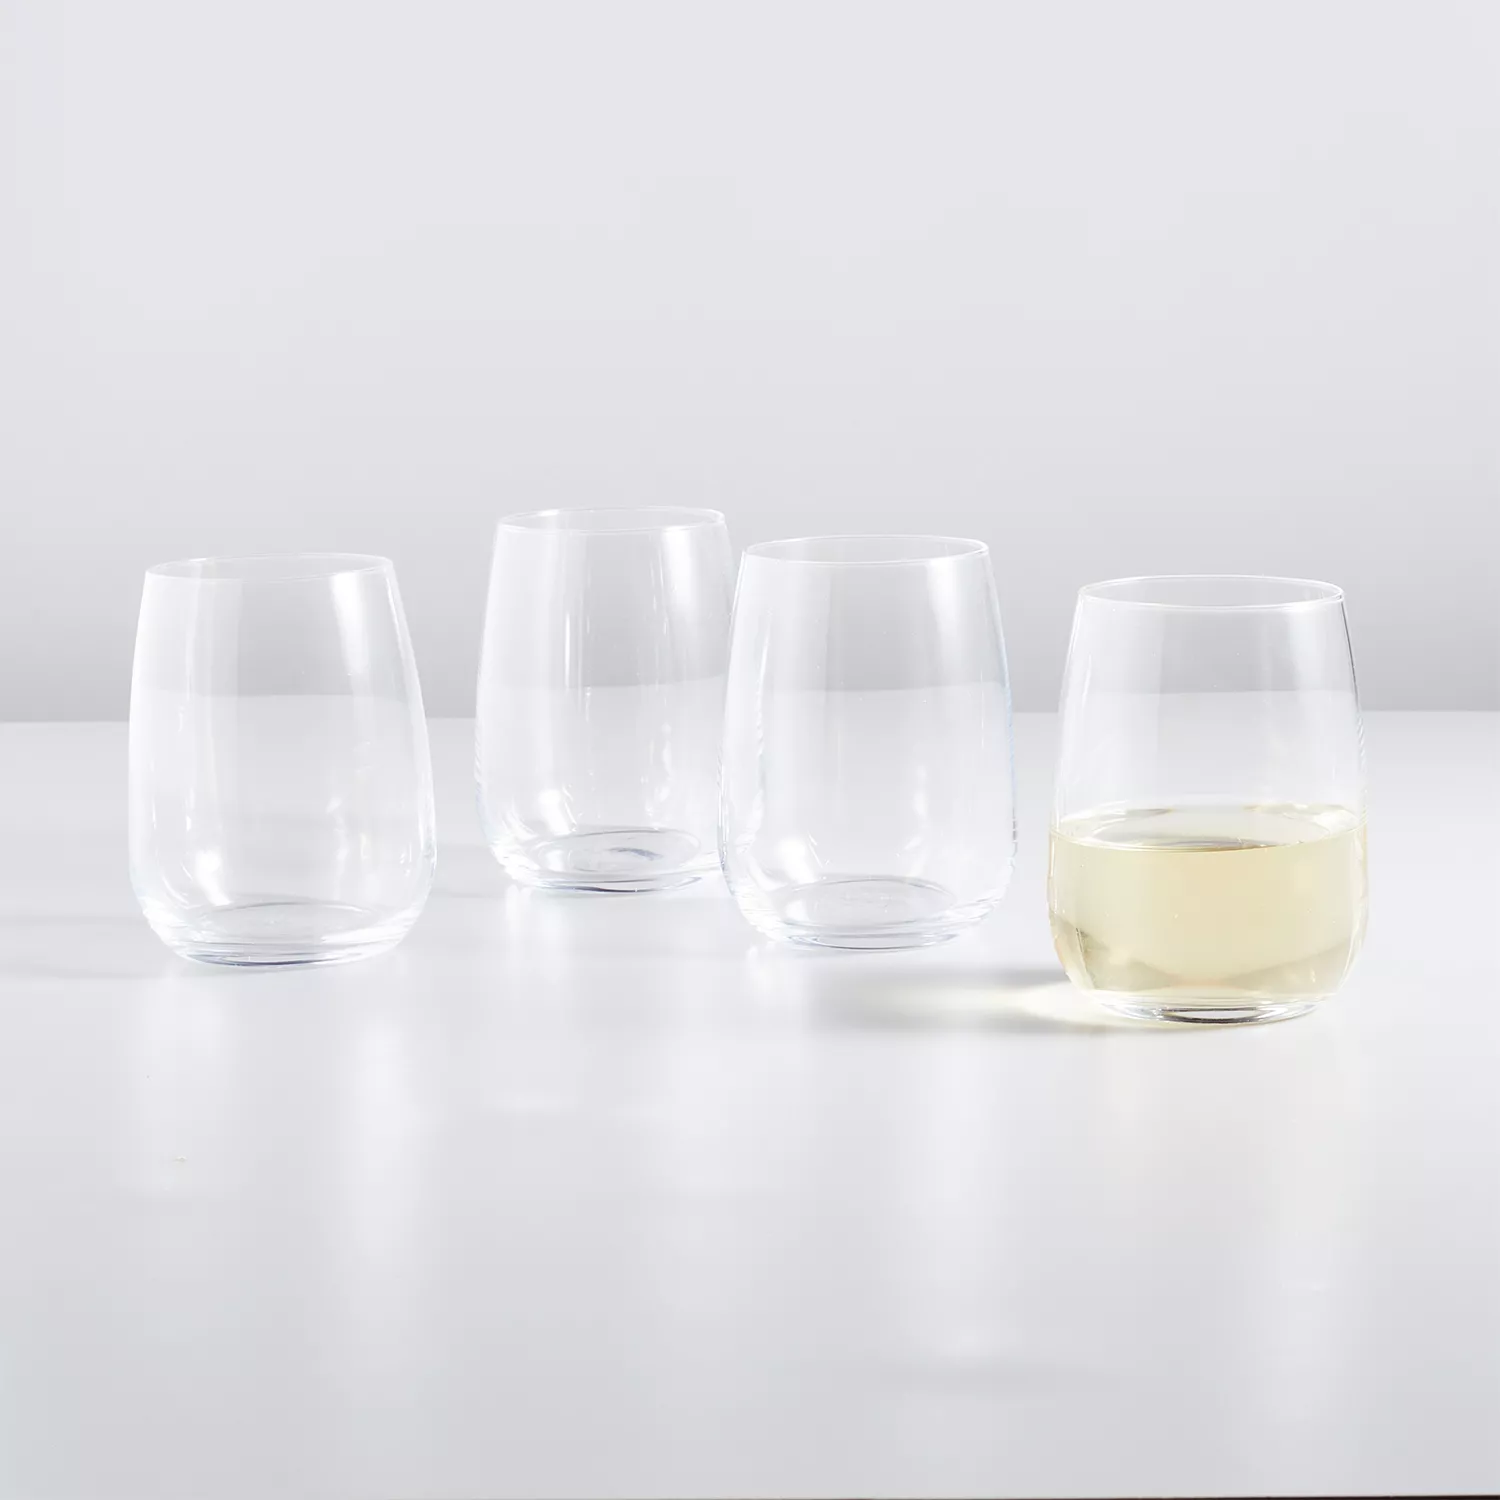 Oxo Silicone Wine Glass Drying Mat : Target